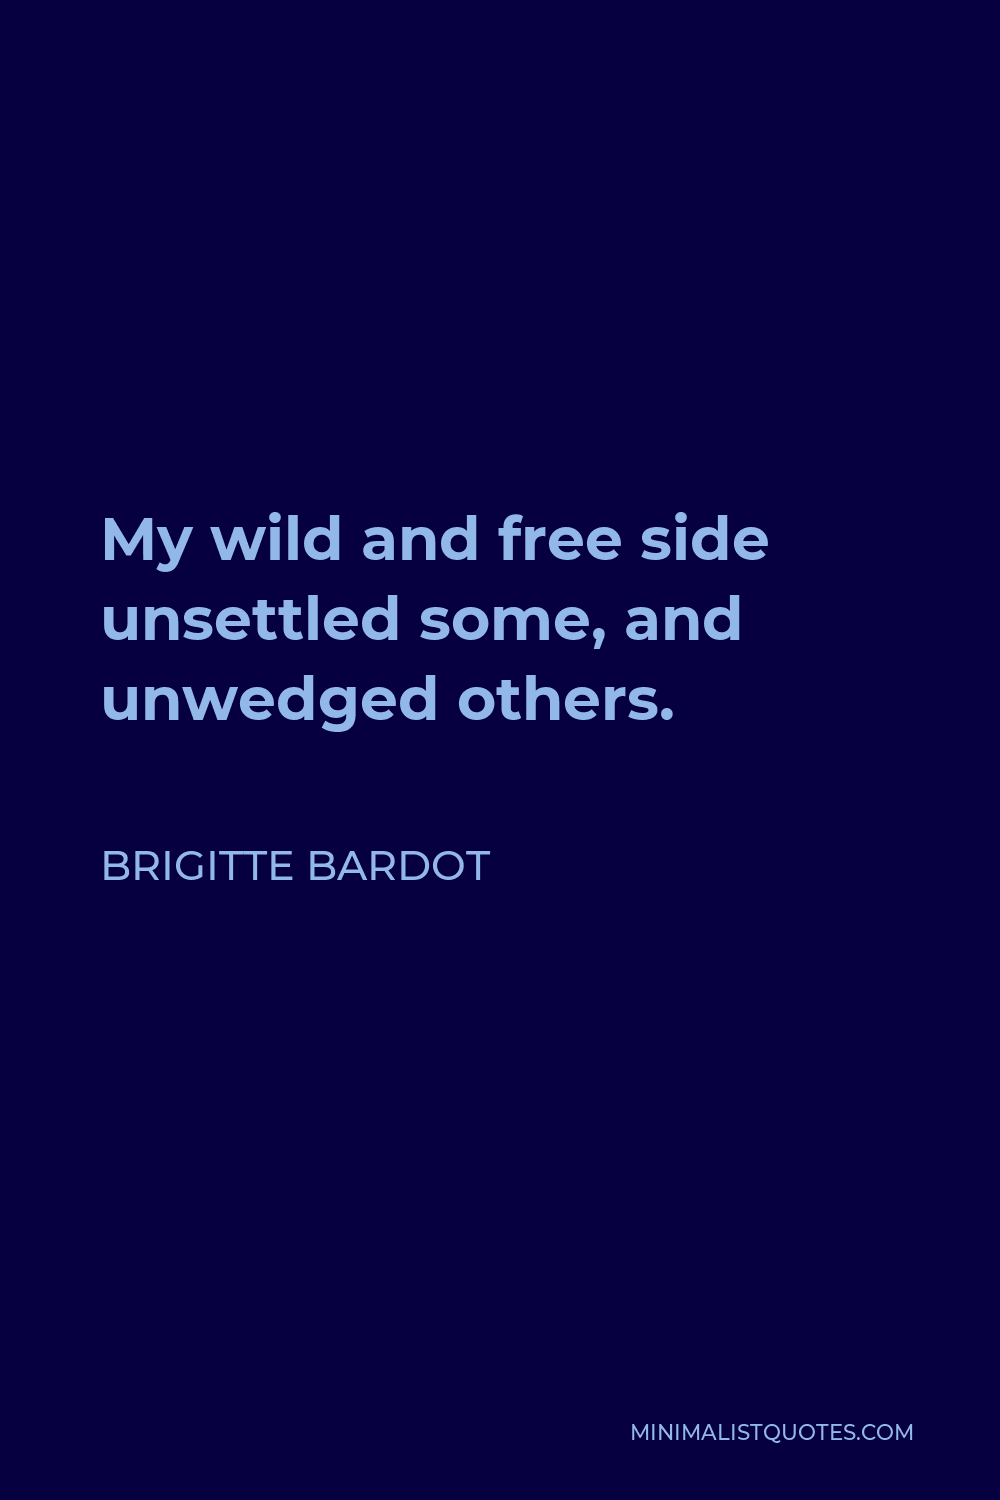 Brigitte Bardot Quote - My wild and free side unsettled some, and unwedged others.